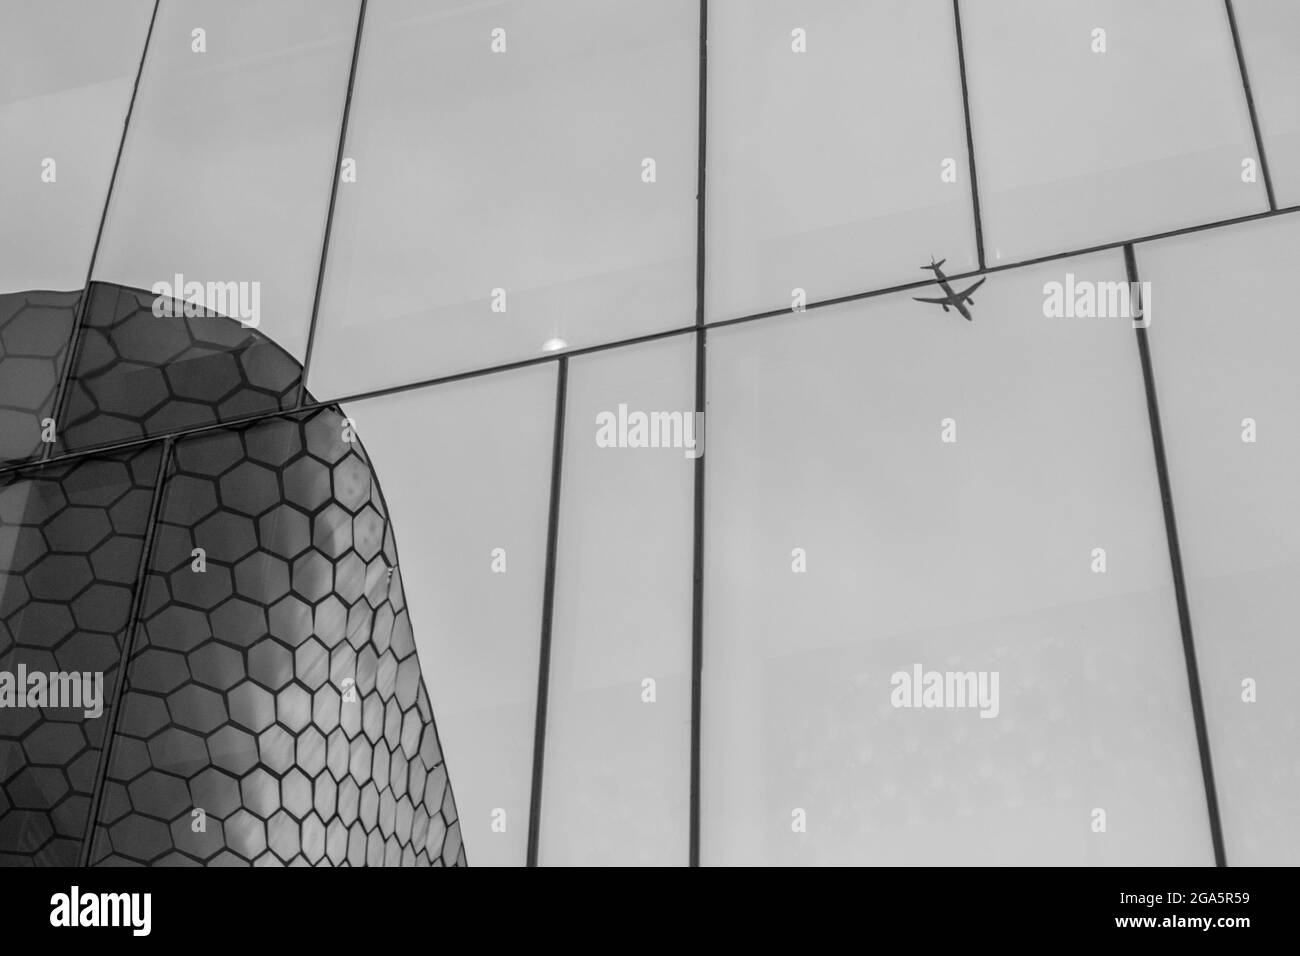 MEXICO CITY, MEXICO - Apr 23, 2019: A monochrome reflection in a glass building of the Soumaya Museum in Mexico City of a plane flying Stock Photo